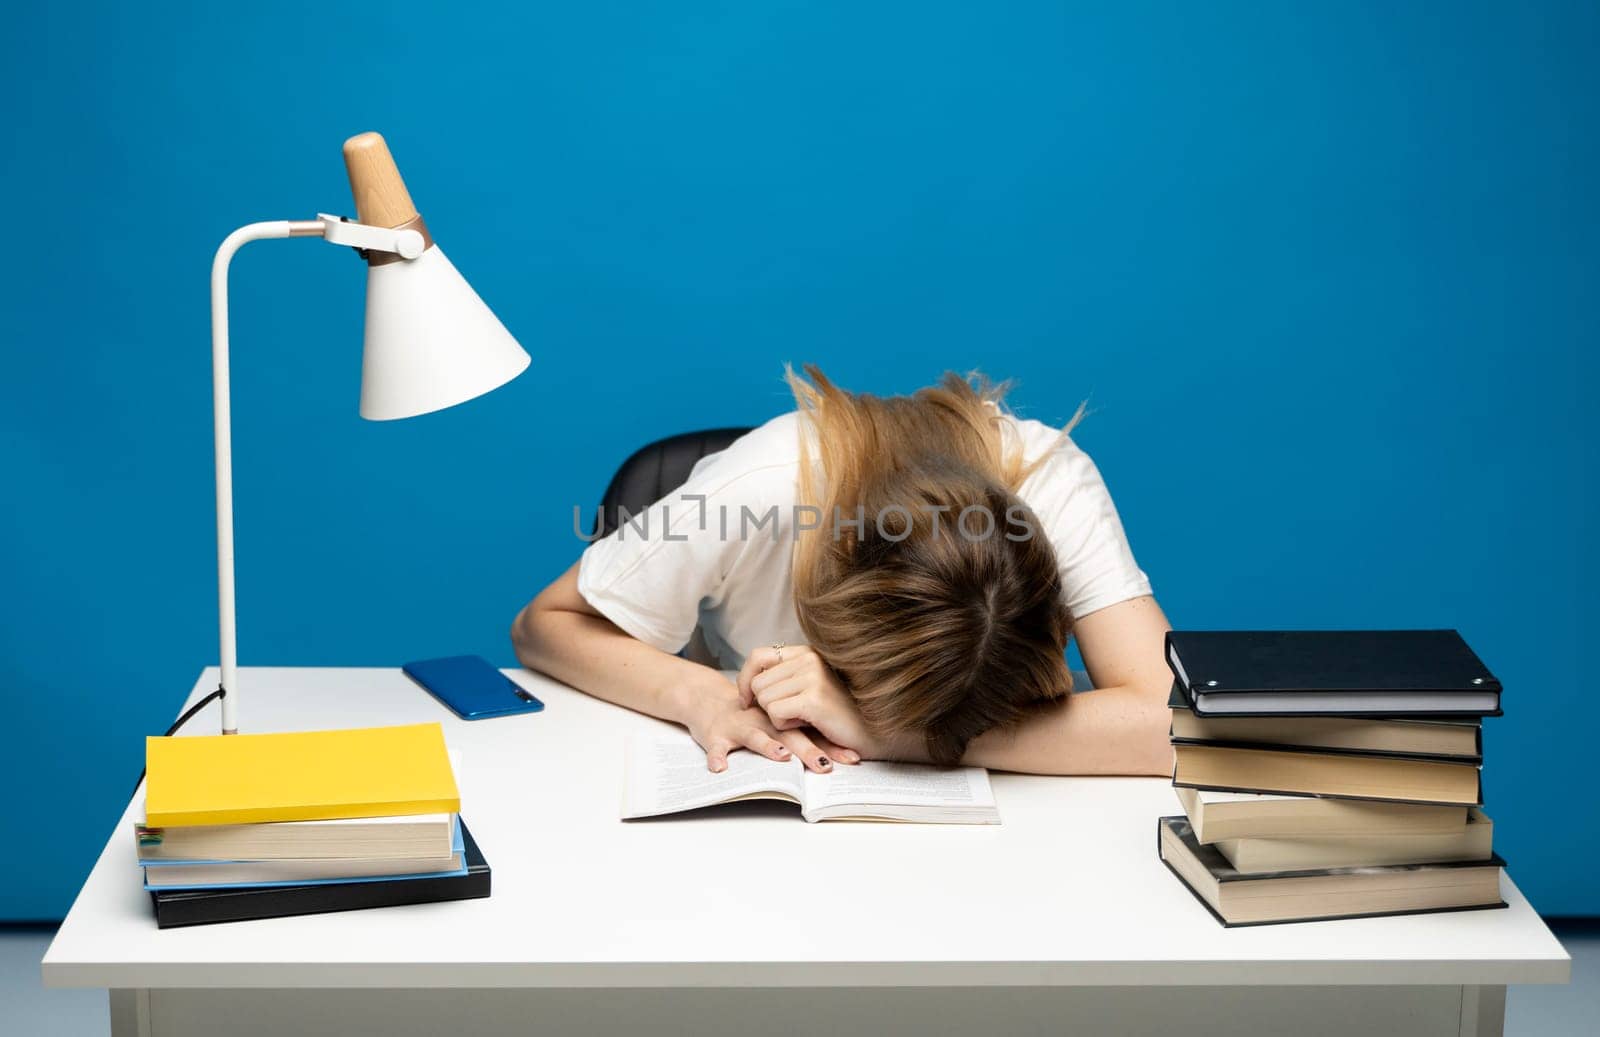 Tired student girl with glasses sleeping on the books in the library. Student studying hard exam and sleeping on books on a blue background. by vovsht